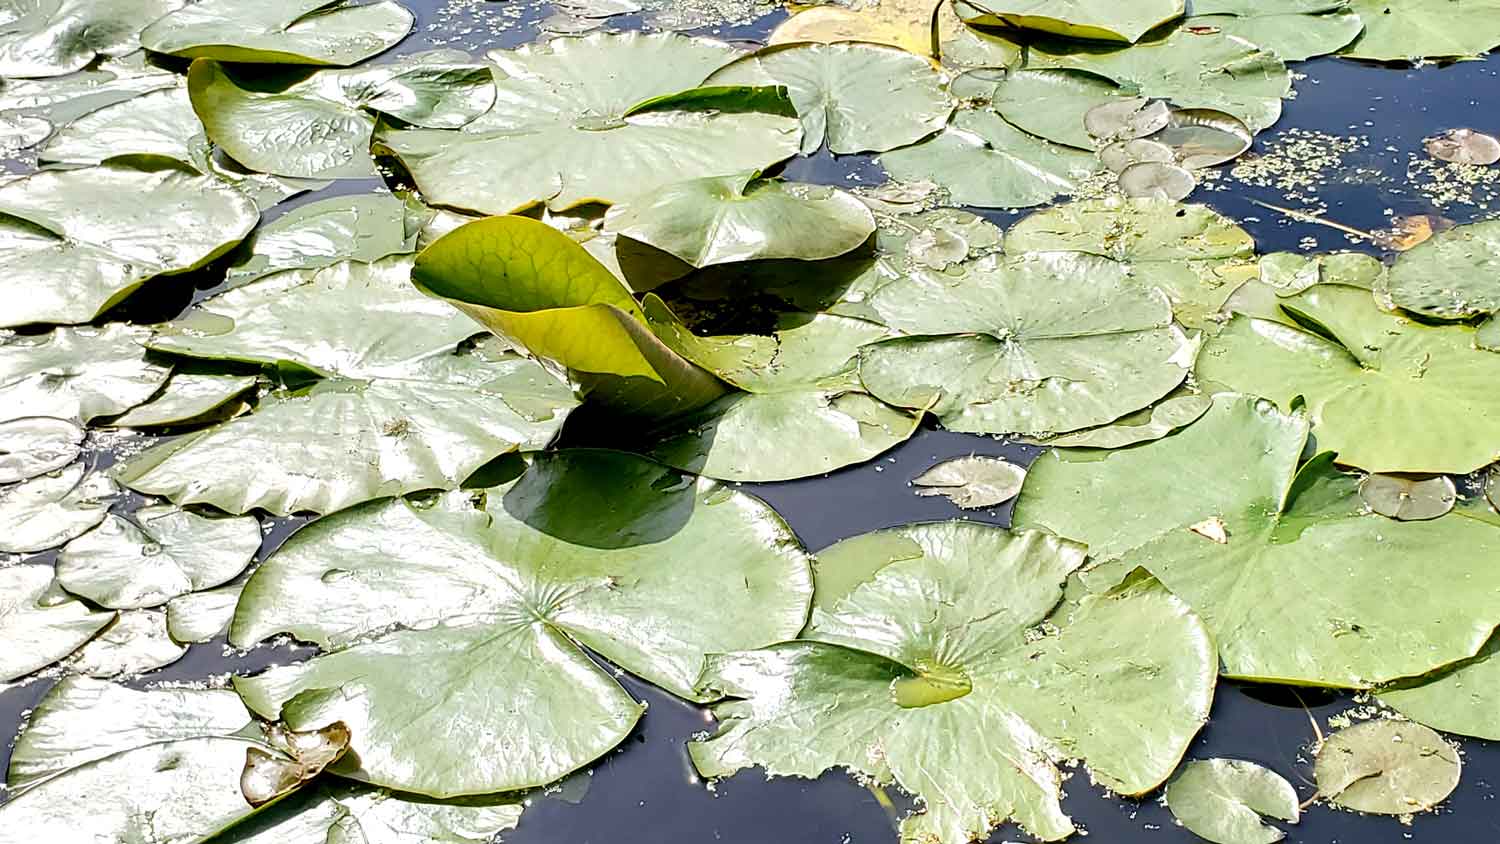 Lilly pads shining in the sunlight at Veteran Acres Park.